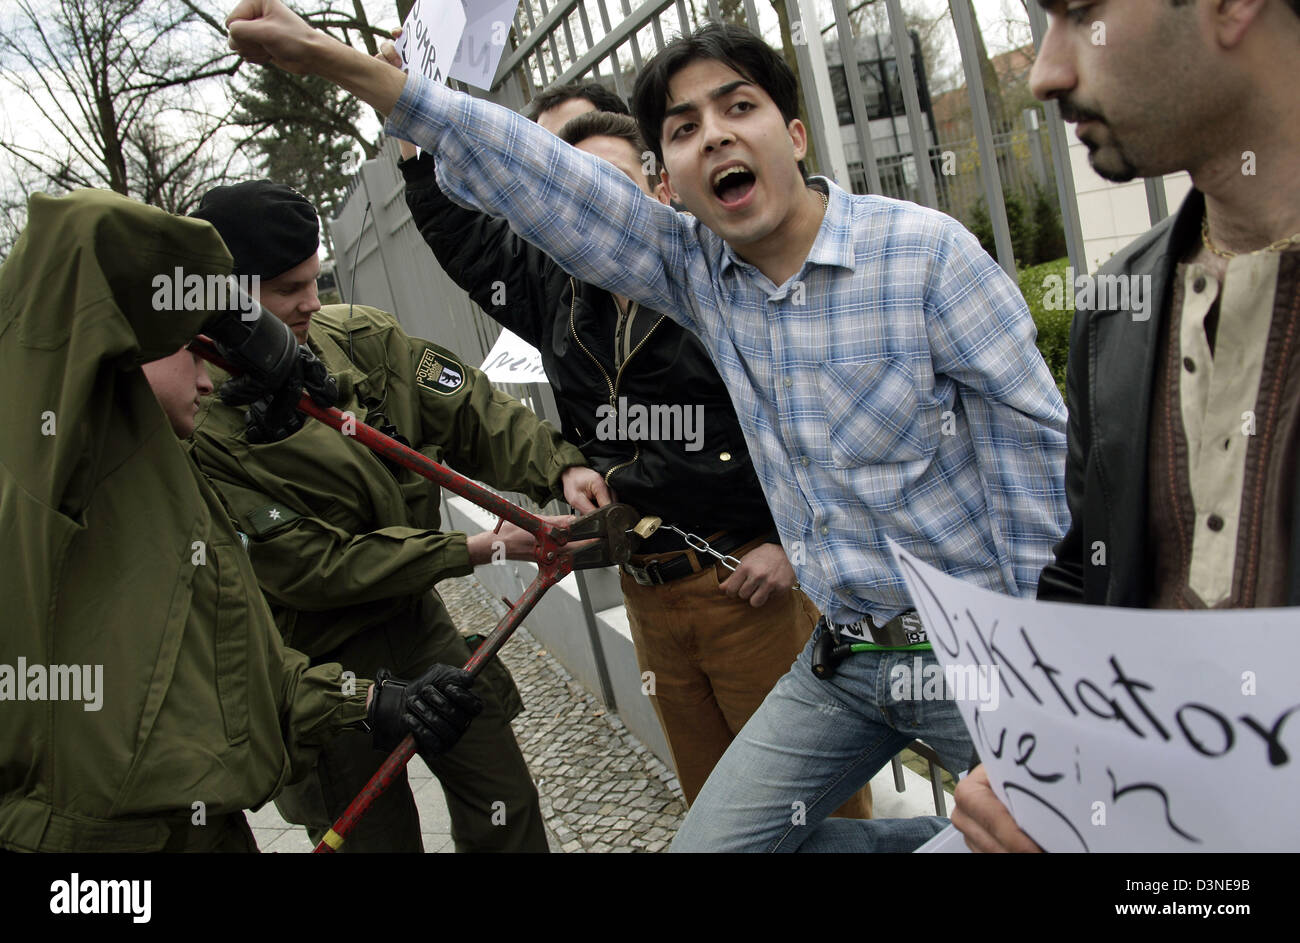 Exile-Iranians chain themselves to a fence in front of the Iranian embassy to demonstrate against their home country's nuclear policy, while policemen uncertain them, Berlin, Germany, Tuesday 18 April 2006. The protesters are against a possible nuclear armament of Iran. Photo: Peer Grimm Stock Photo